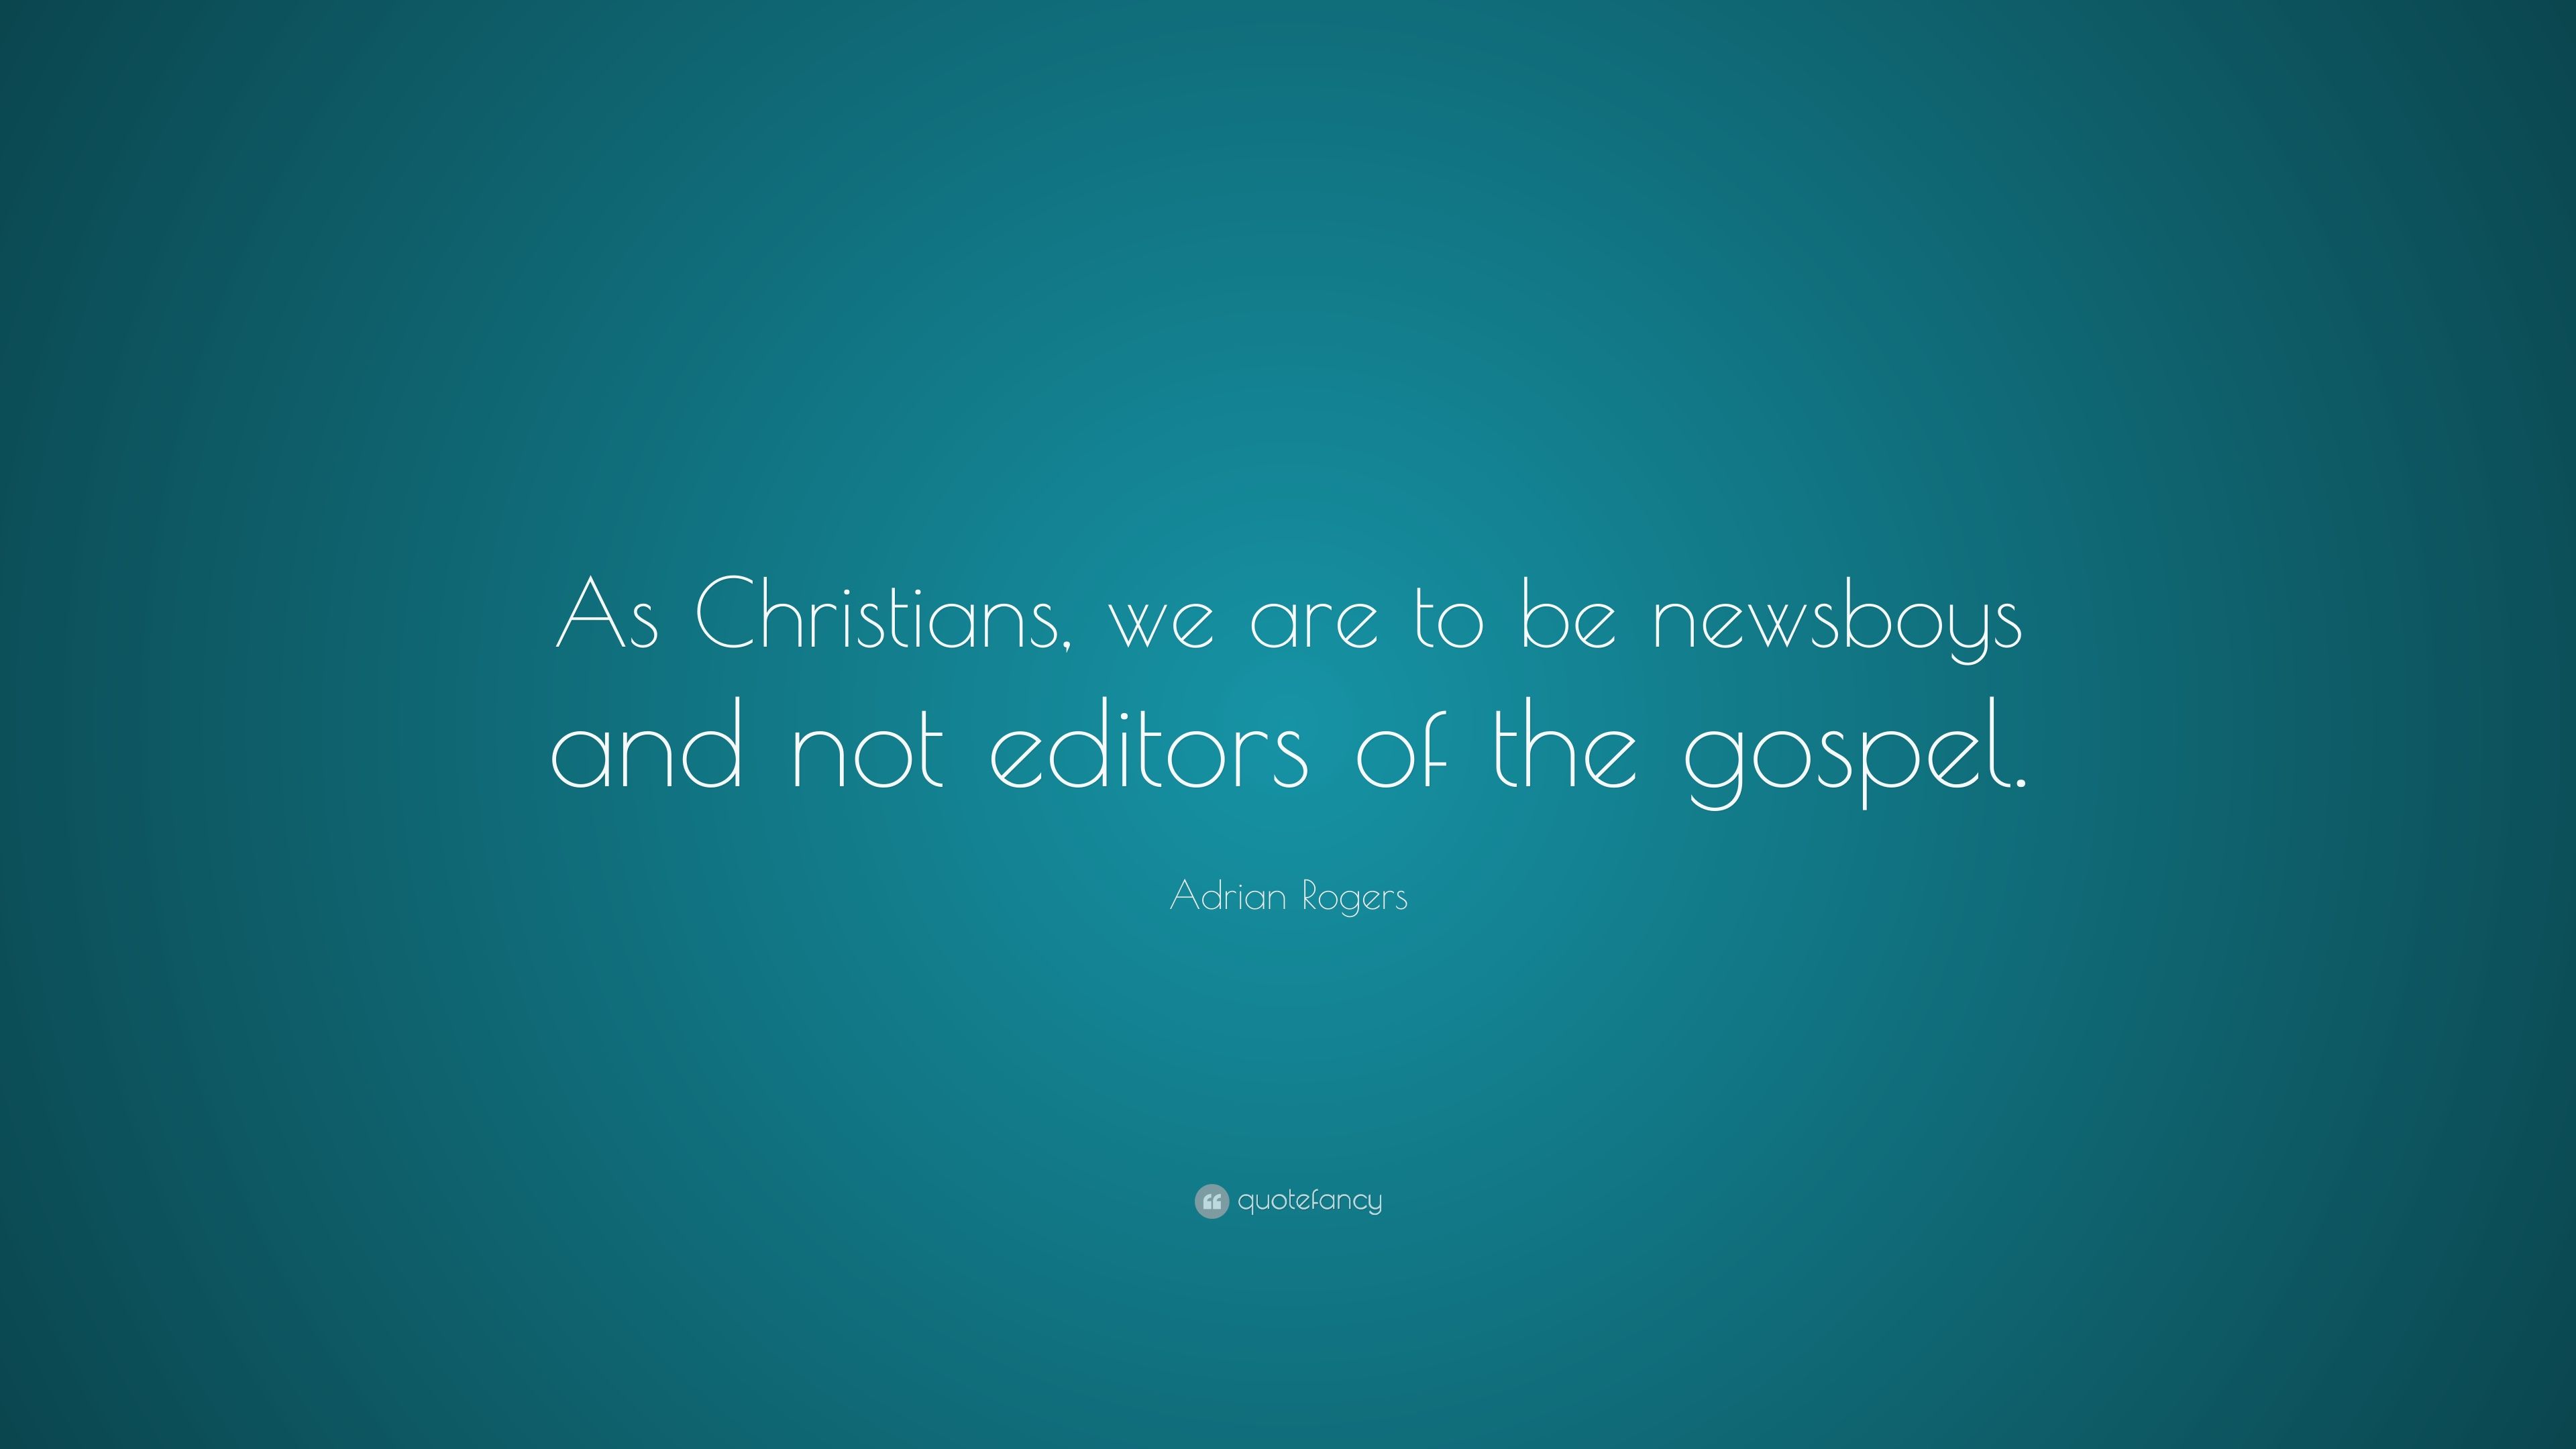 Adrian Rogers Quote: “As Christians, we are to be newsboys and not editors of the gospel.” (7 wallpaper)